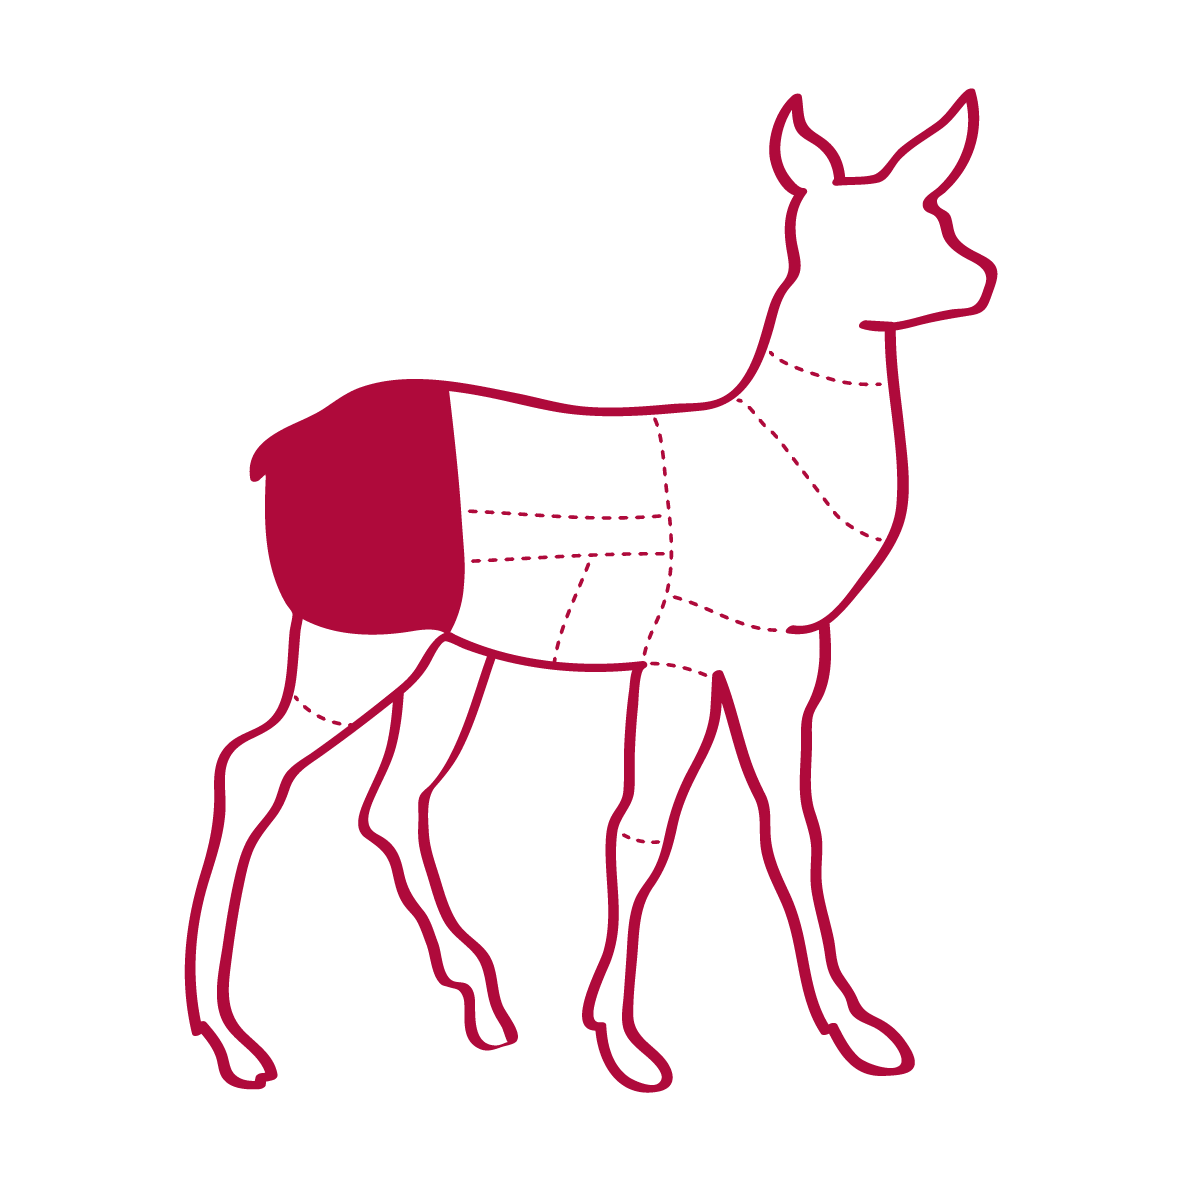 an illustration of a venison carcass showing where steaks come from